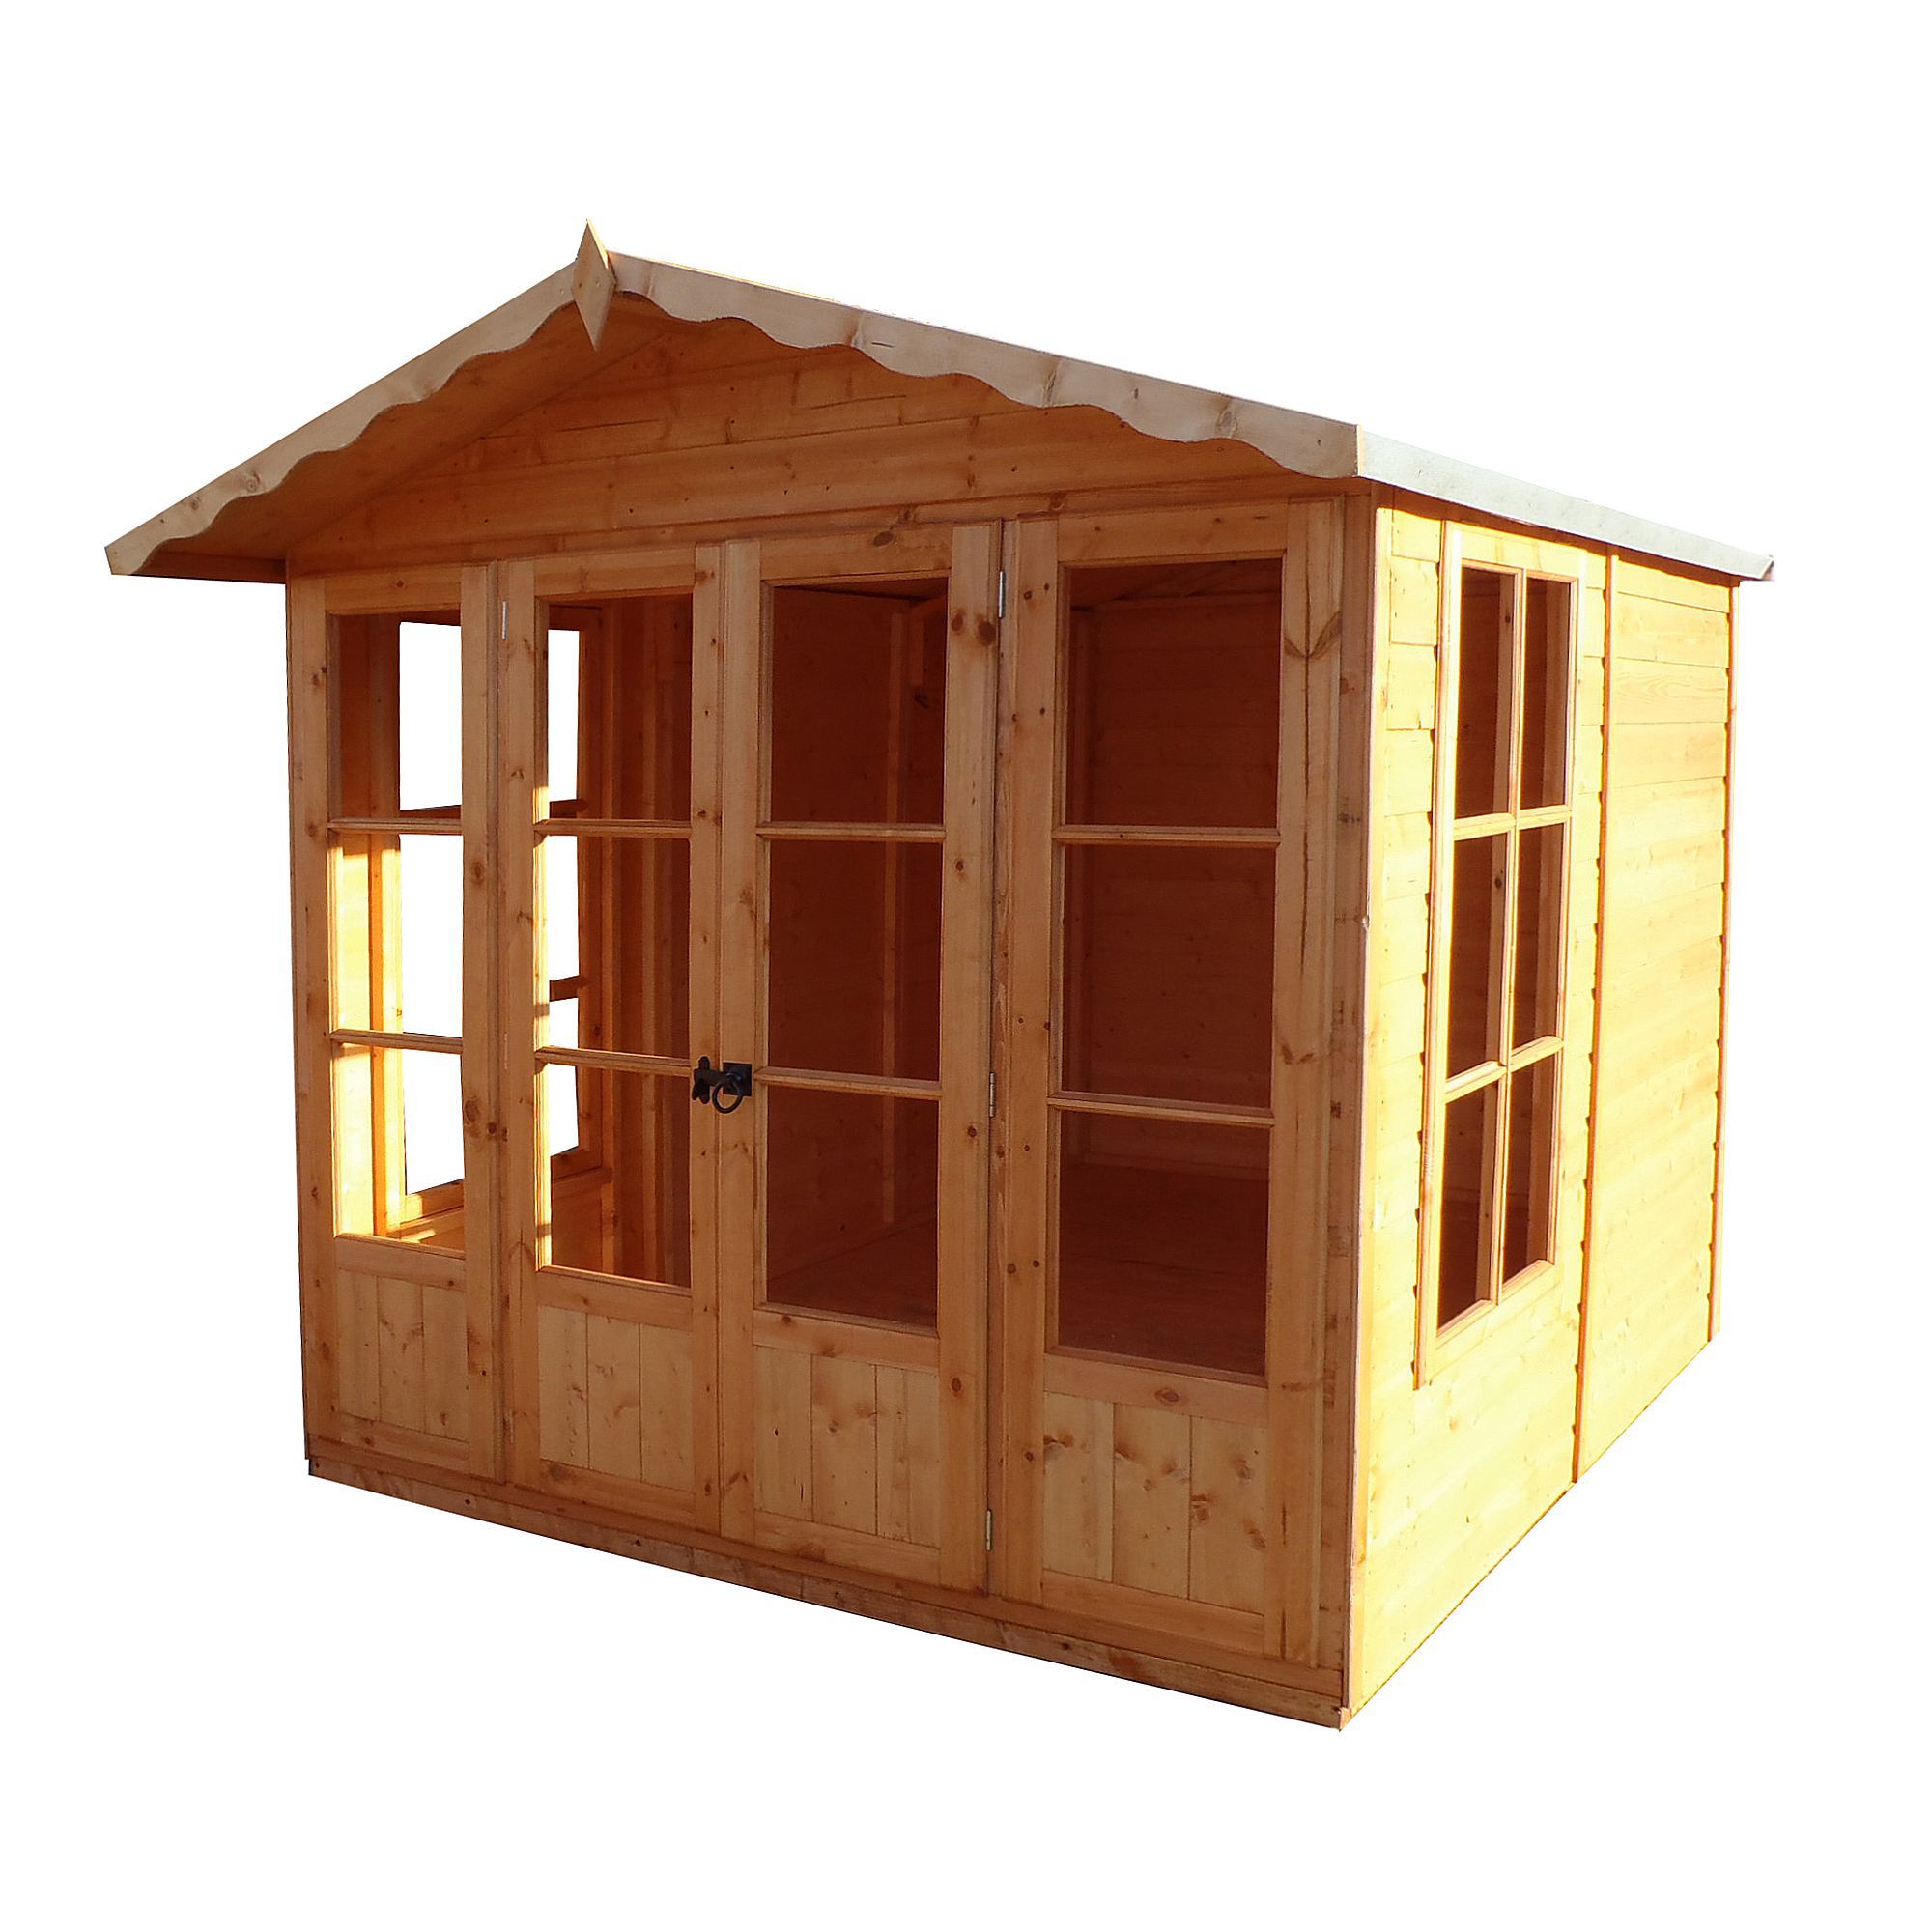 Shire Kensington 7x7 Apex Shiplap Wooden Summer house (Base included)